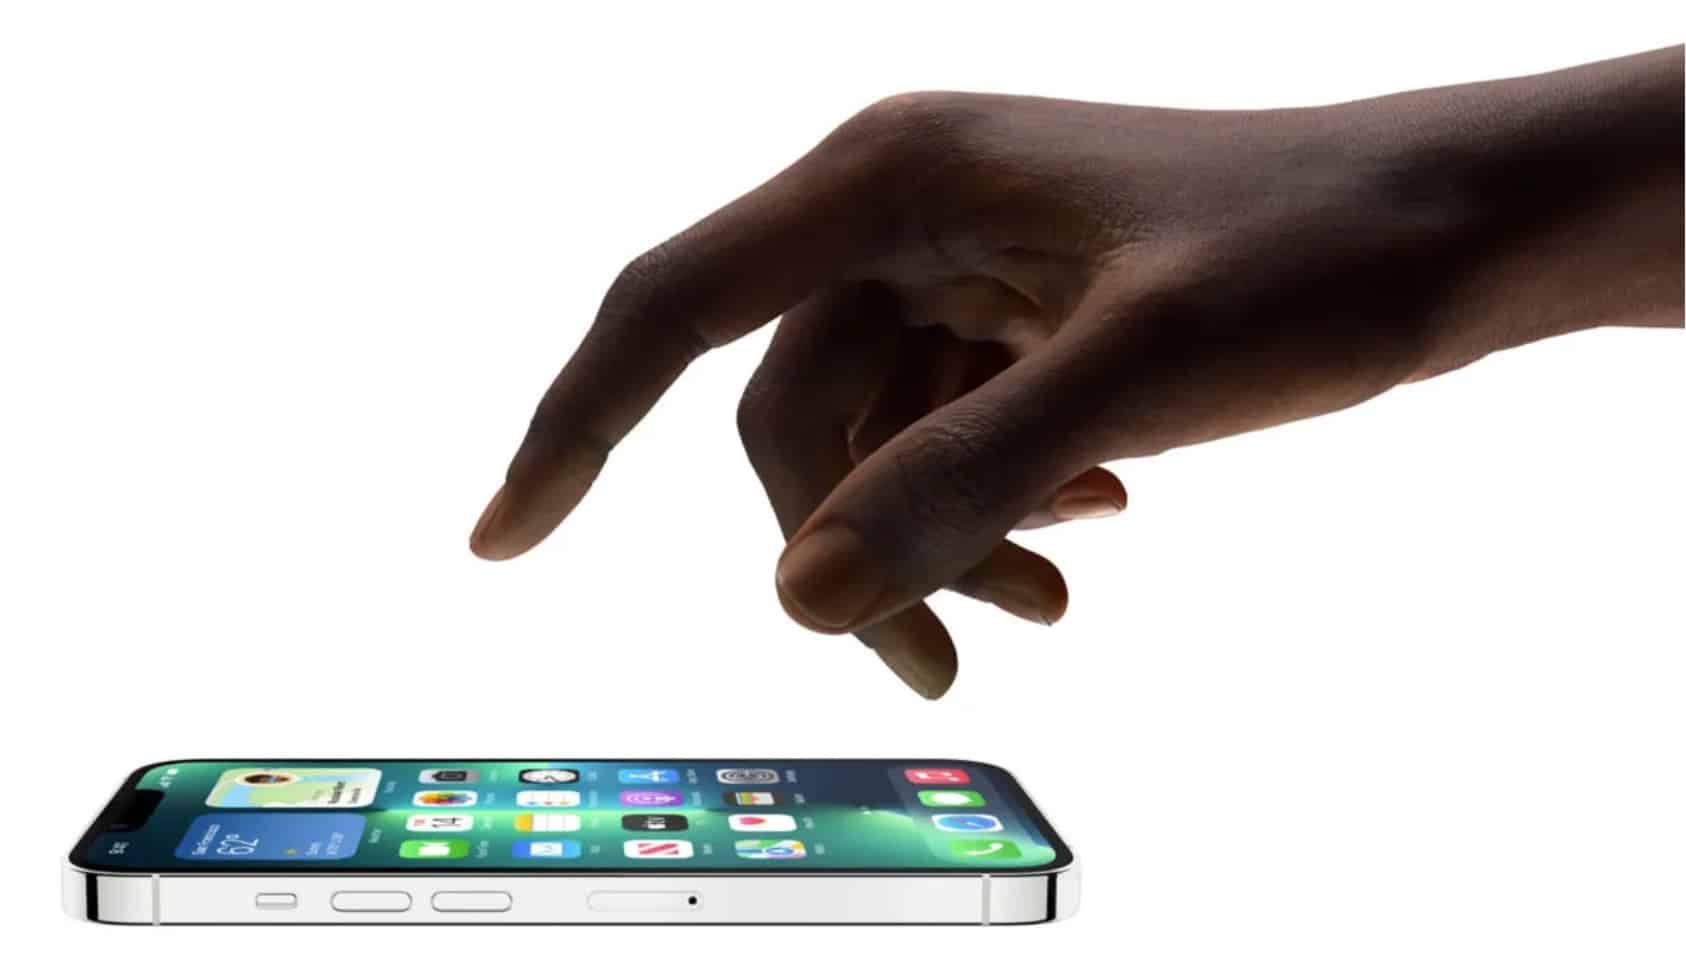 These Hidden iPhone Gestures You Probably Didn’t Know About